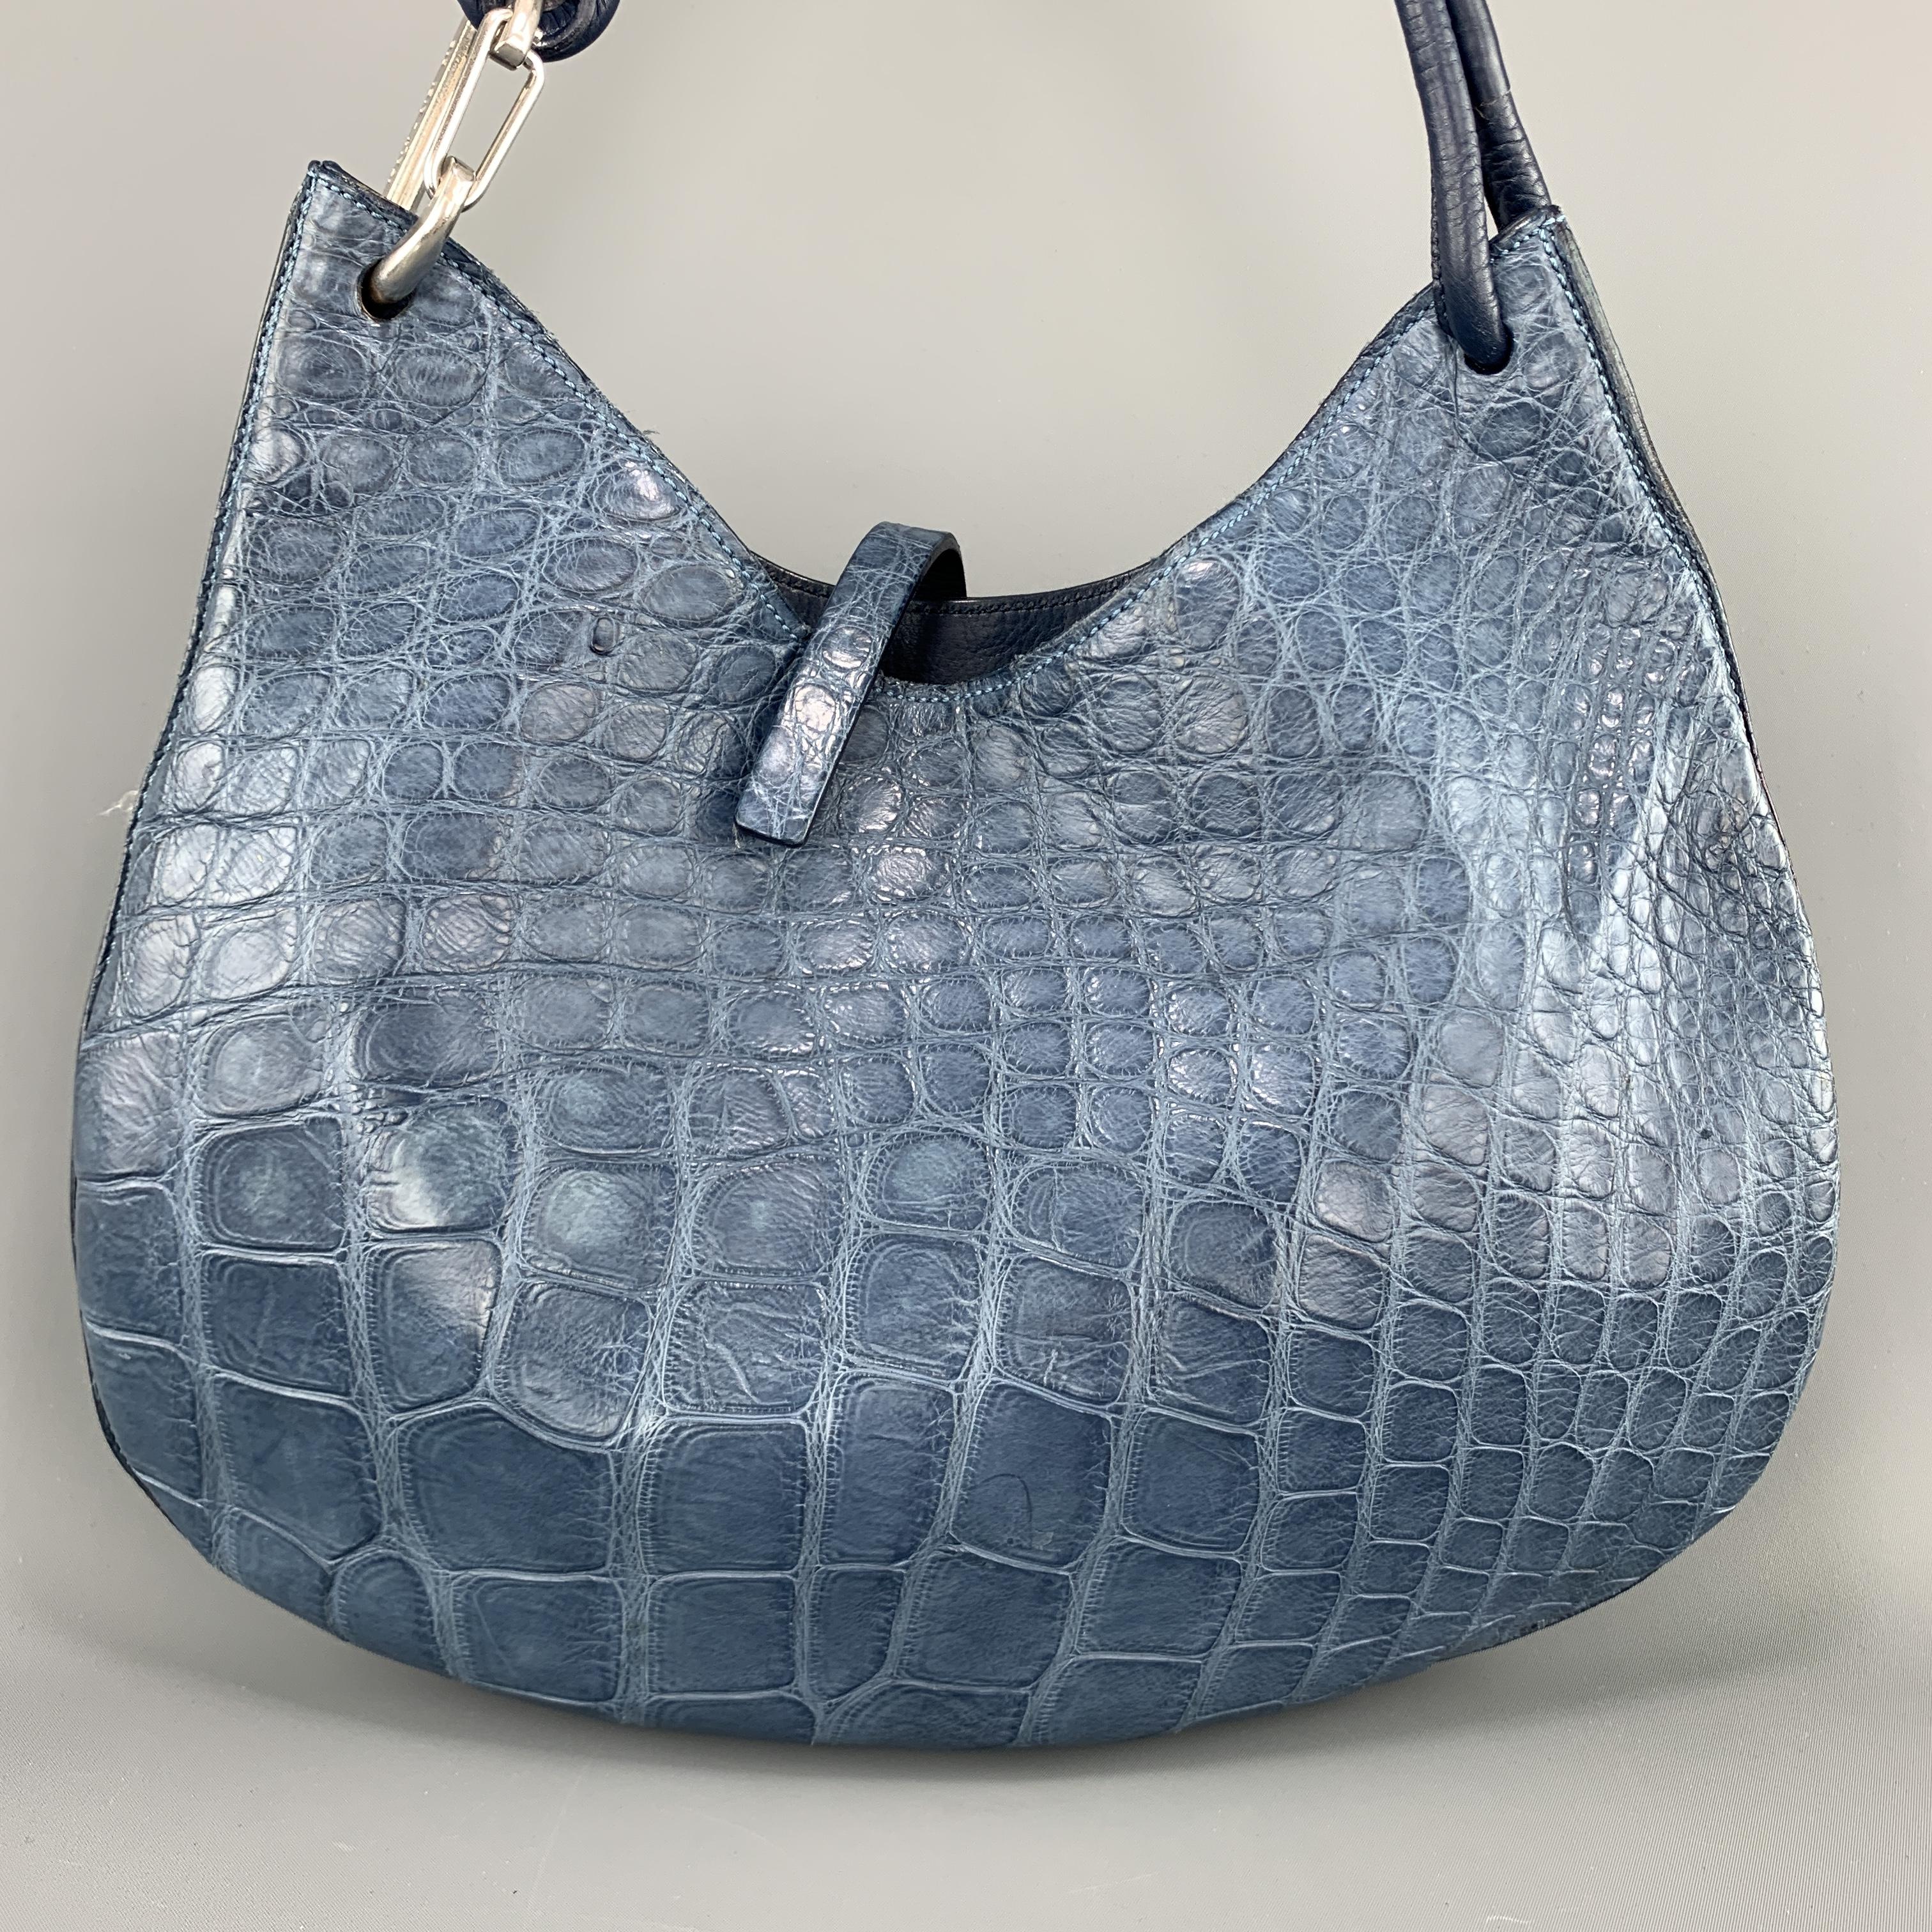 MAURO GOVERNA shoulder bag comes in blue alligator leather with a top strap, suede liner, and knitted shoulder strap with silver tone hardware clip detail. 

Very Good Pre-Owned Condition.

Measurements:

Length: 14.5 in.
Width: 1.5 in.
Height: